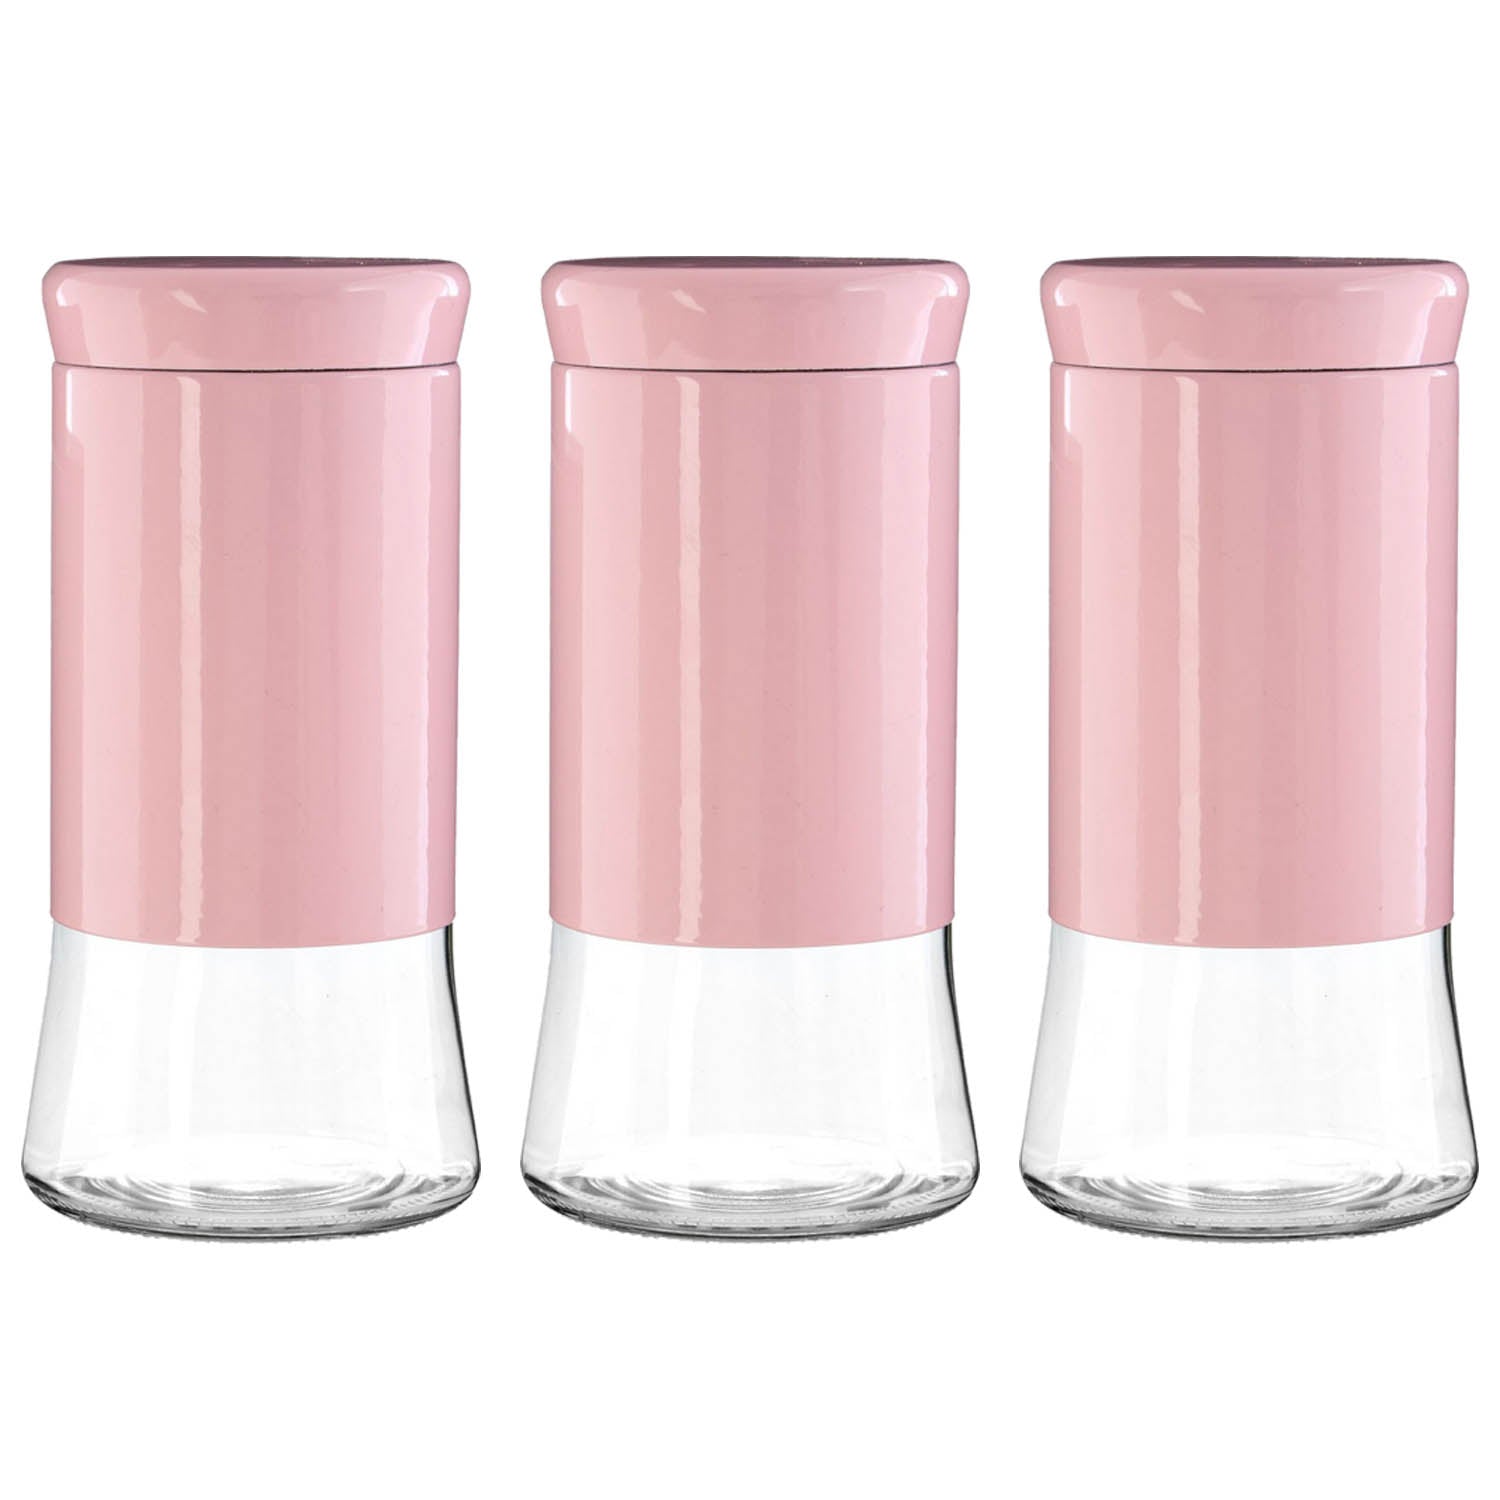 Set of 3 1.5 Litre Pink Stainless Steel Glass Storage Jars